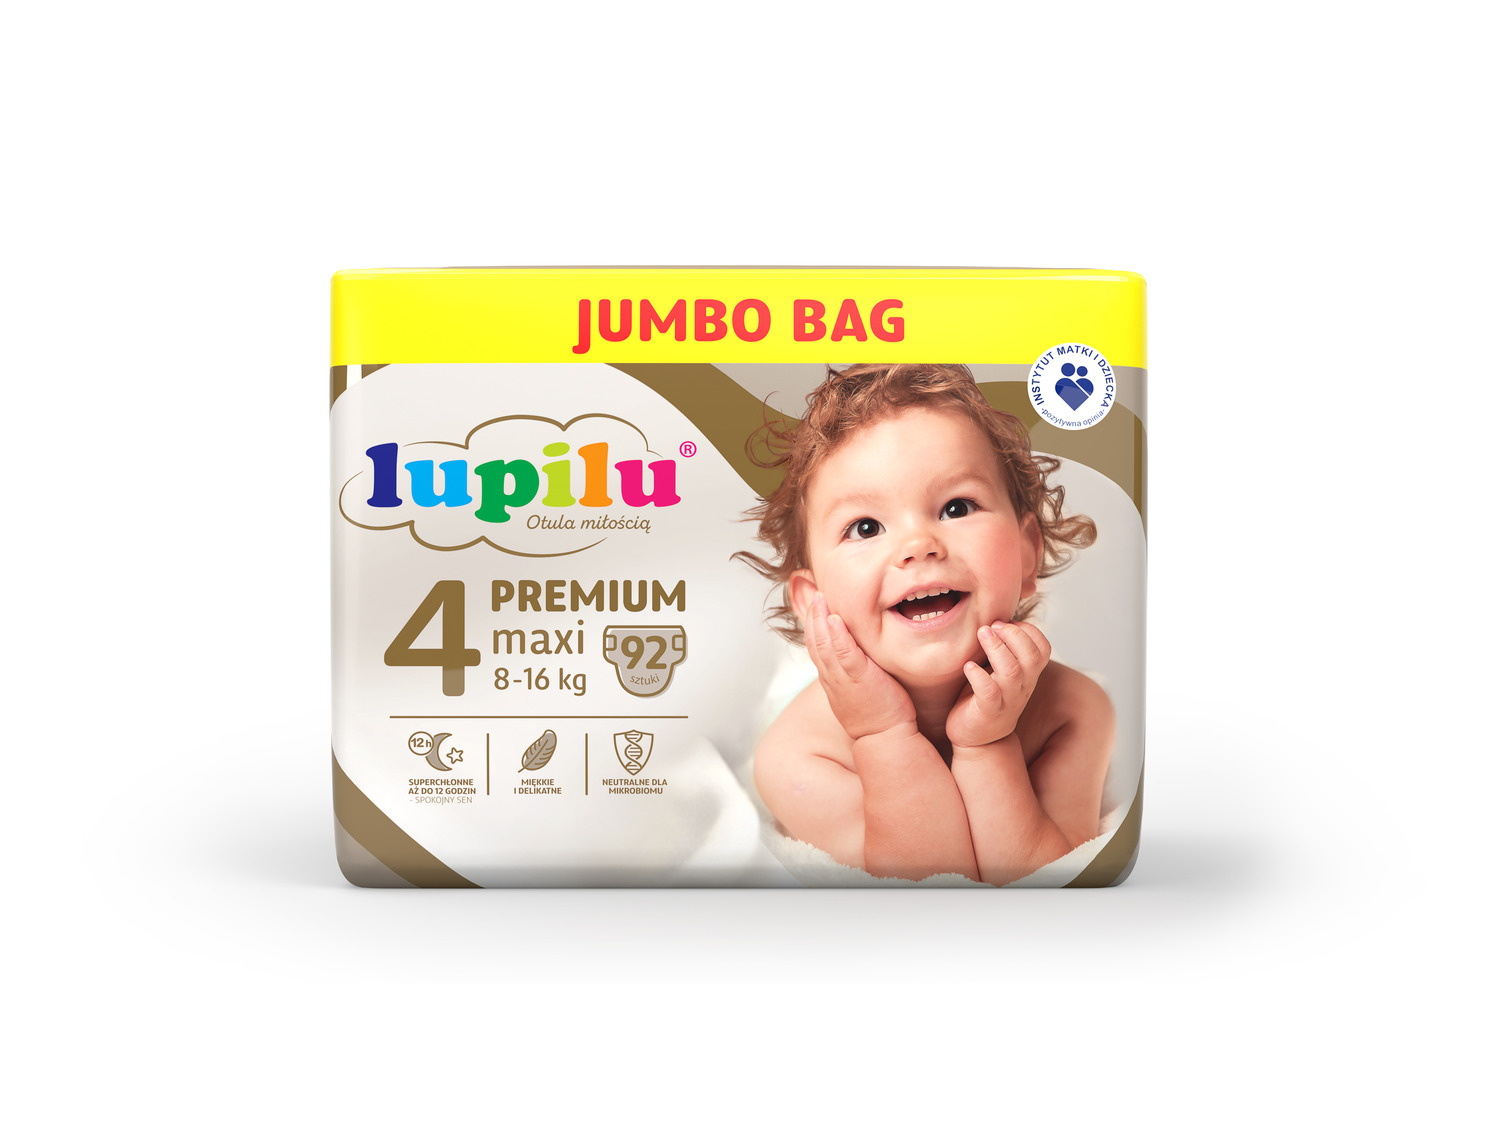 pampersy pampers lidl 4